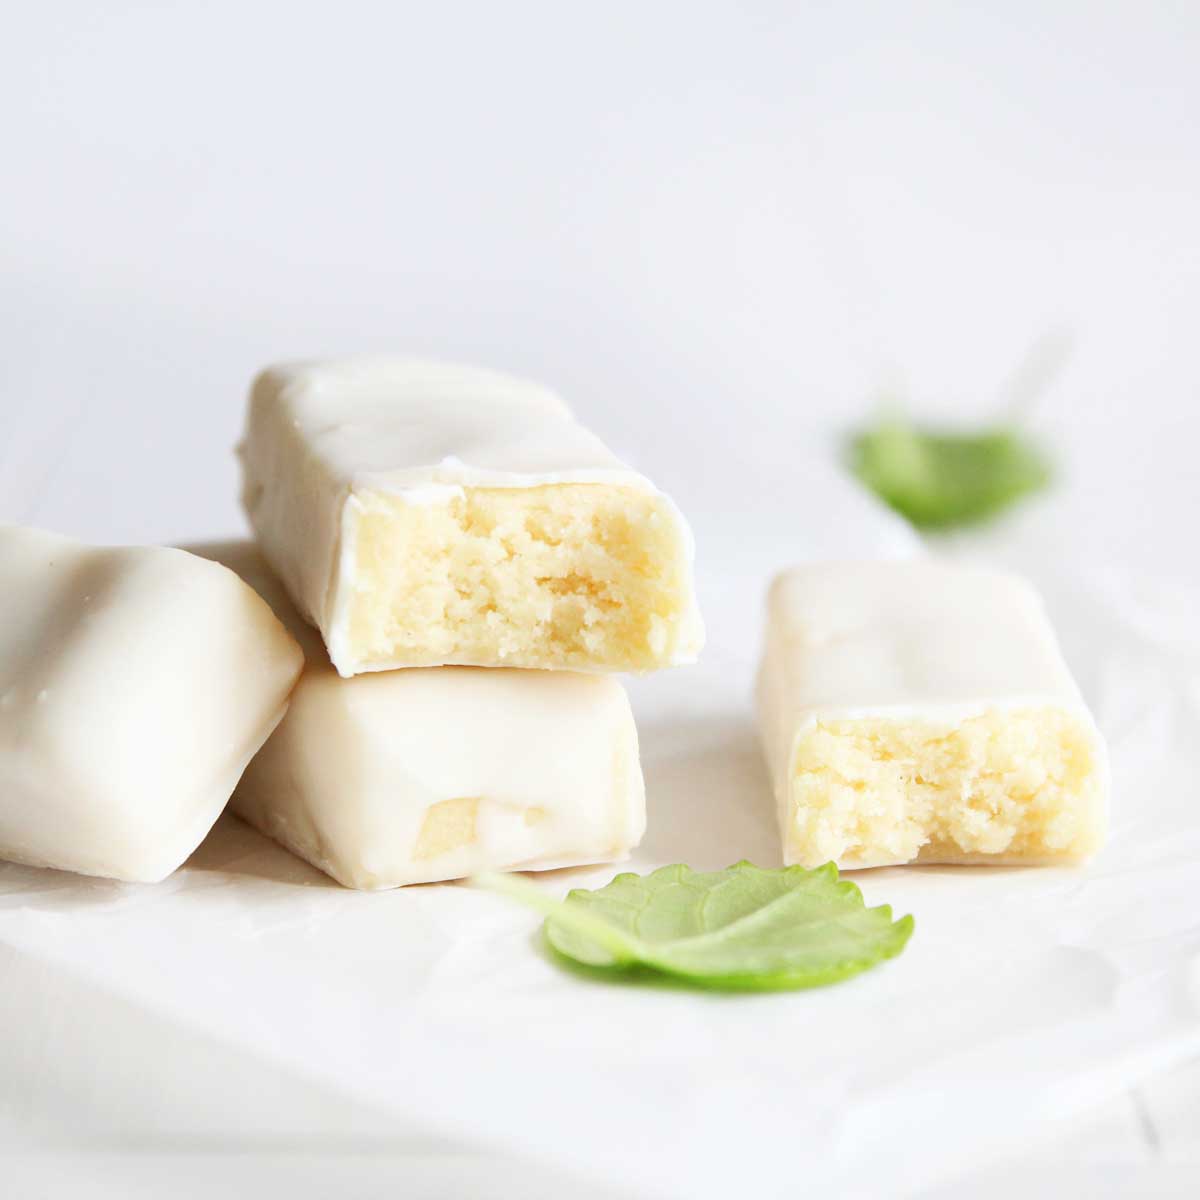 Healthy Homemade Lemon Protein Bars made with Collagen Peptides - Lemon Whipped Cream